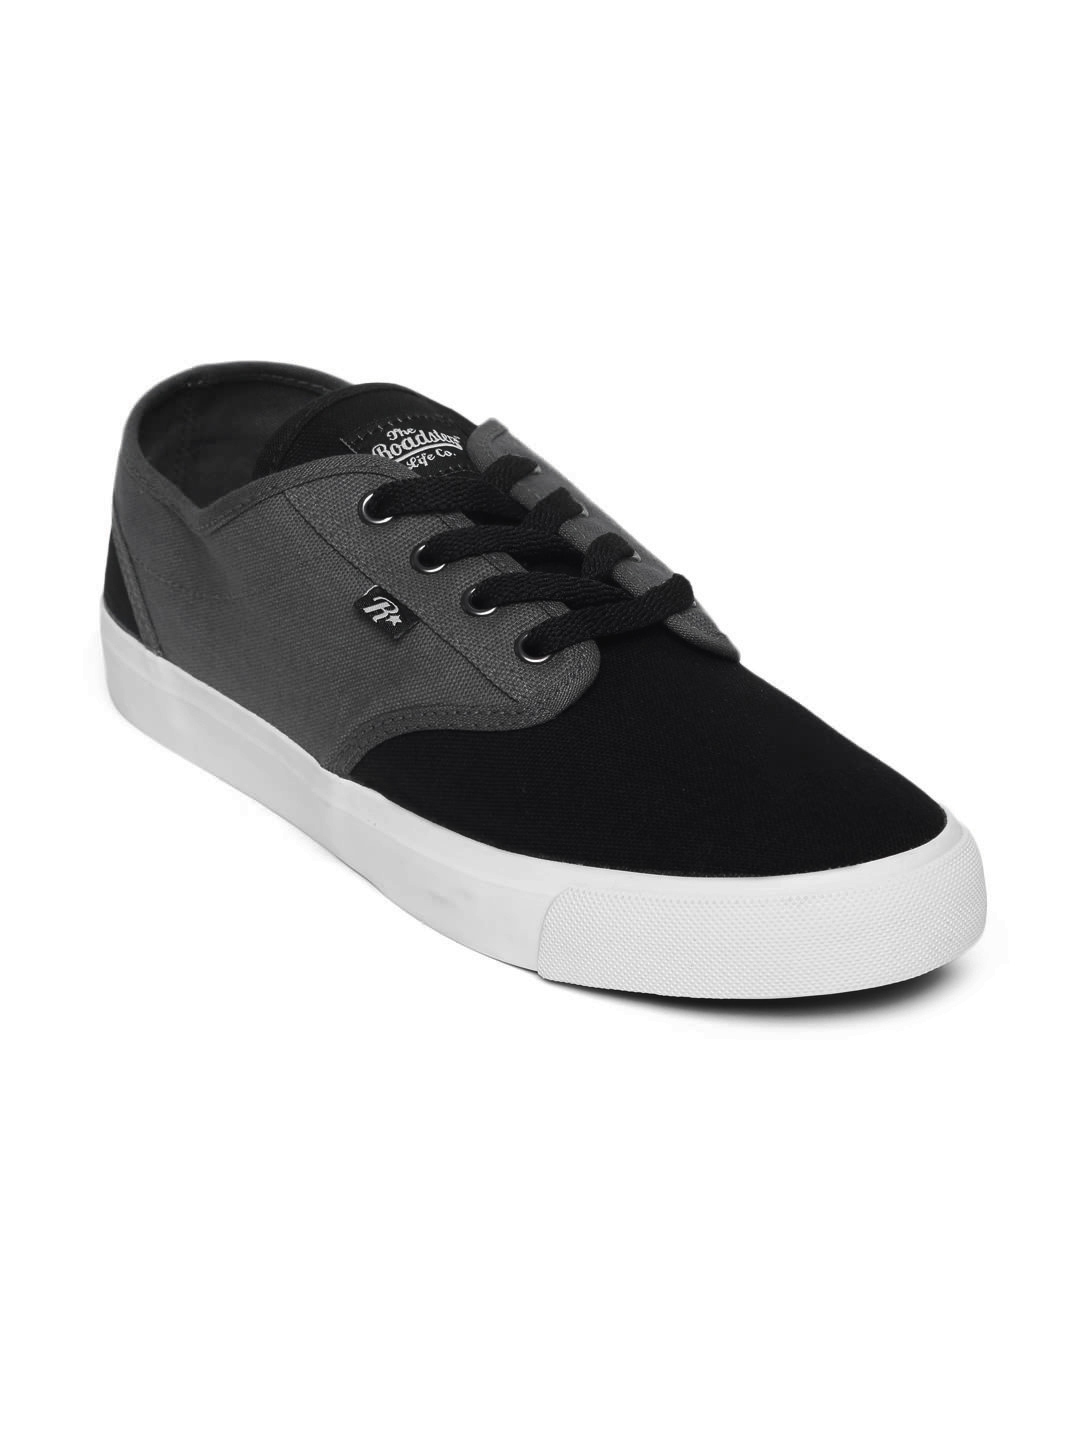 Buy Roadster Men Black & Grey Casual Shoes - Casual Shoes for Men ...